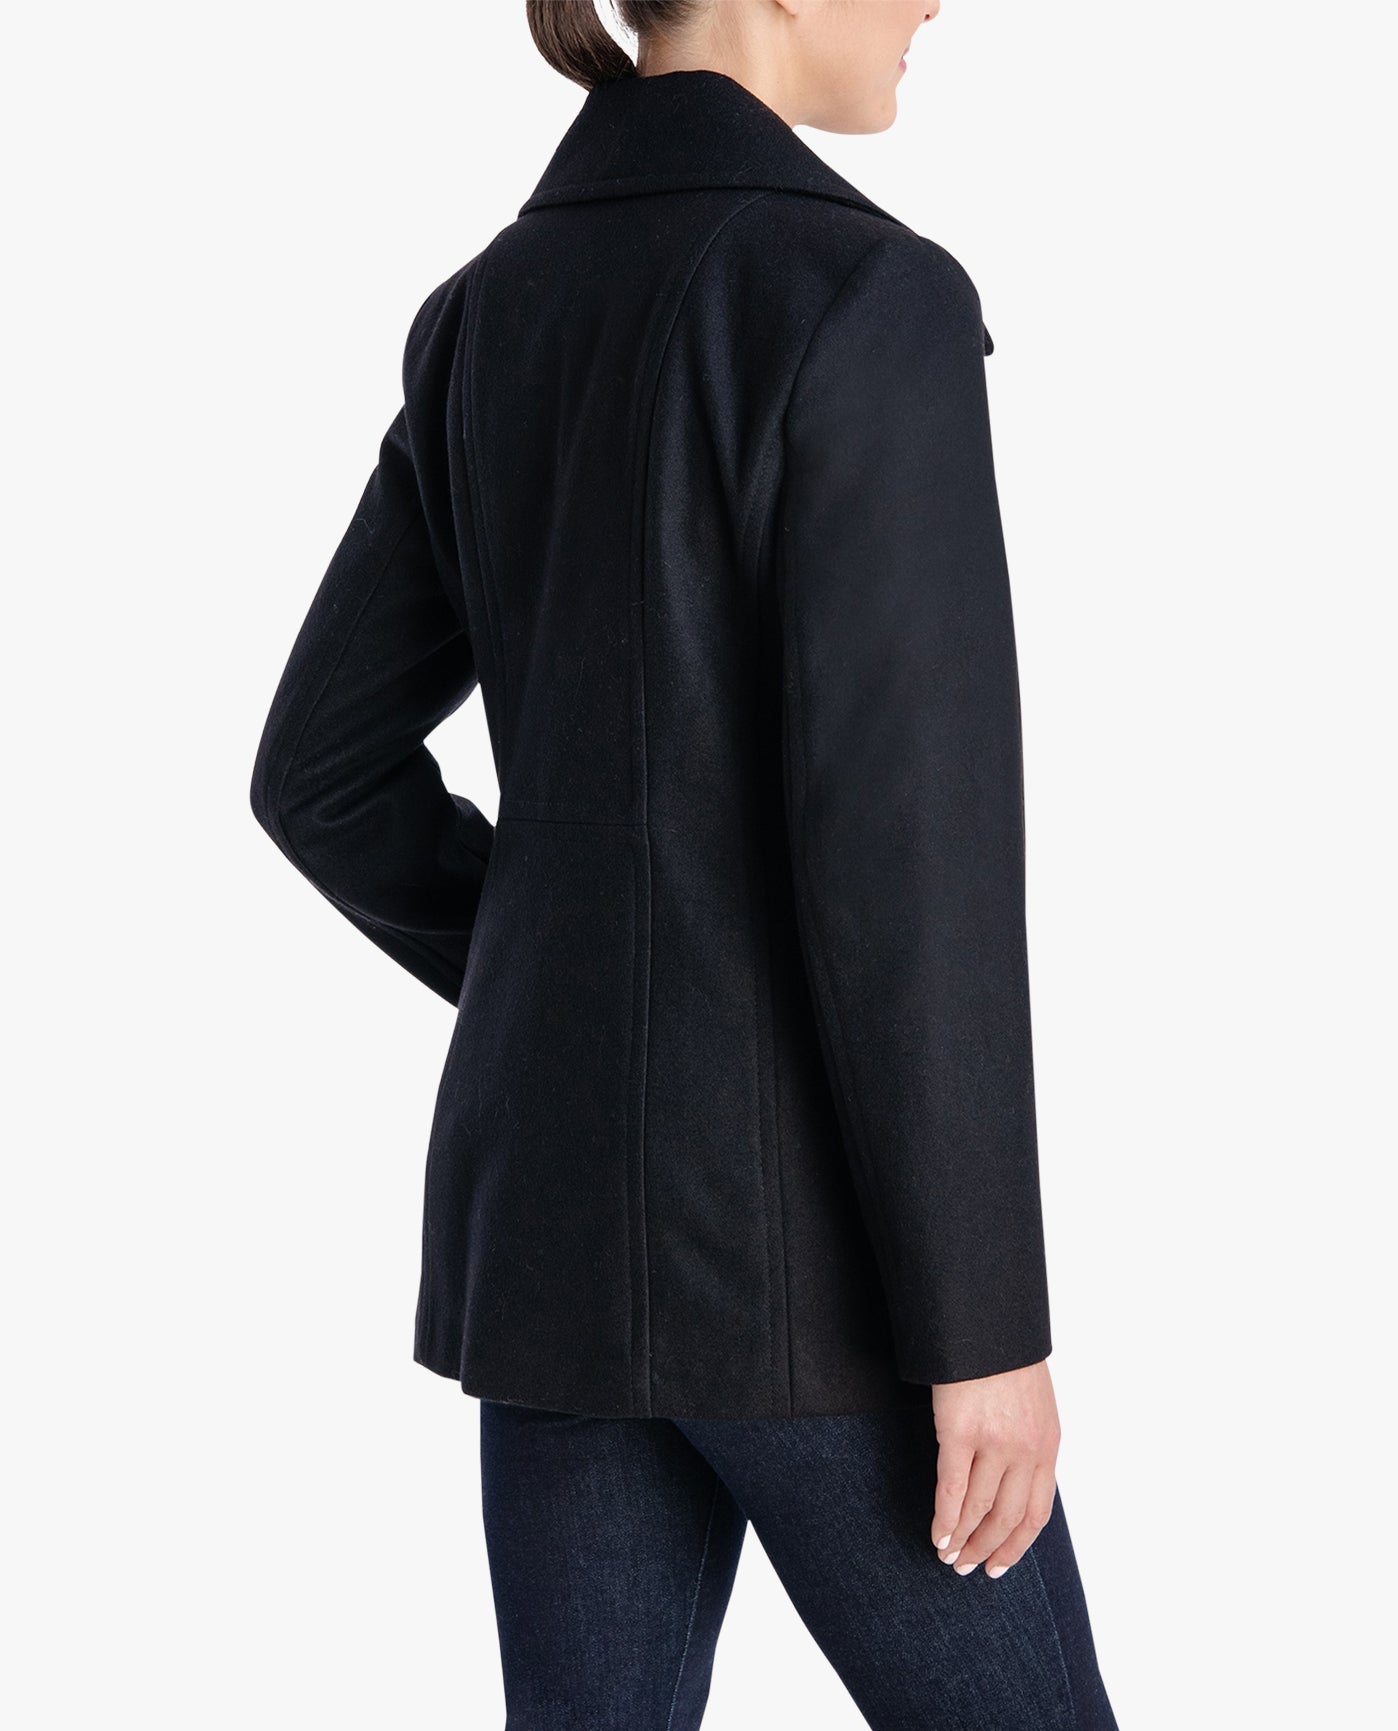 Back View Of DOUBLE BREASTED PEACOAT WITH SCARF | BLACK